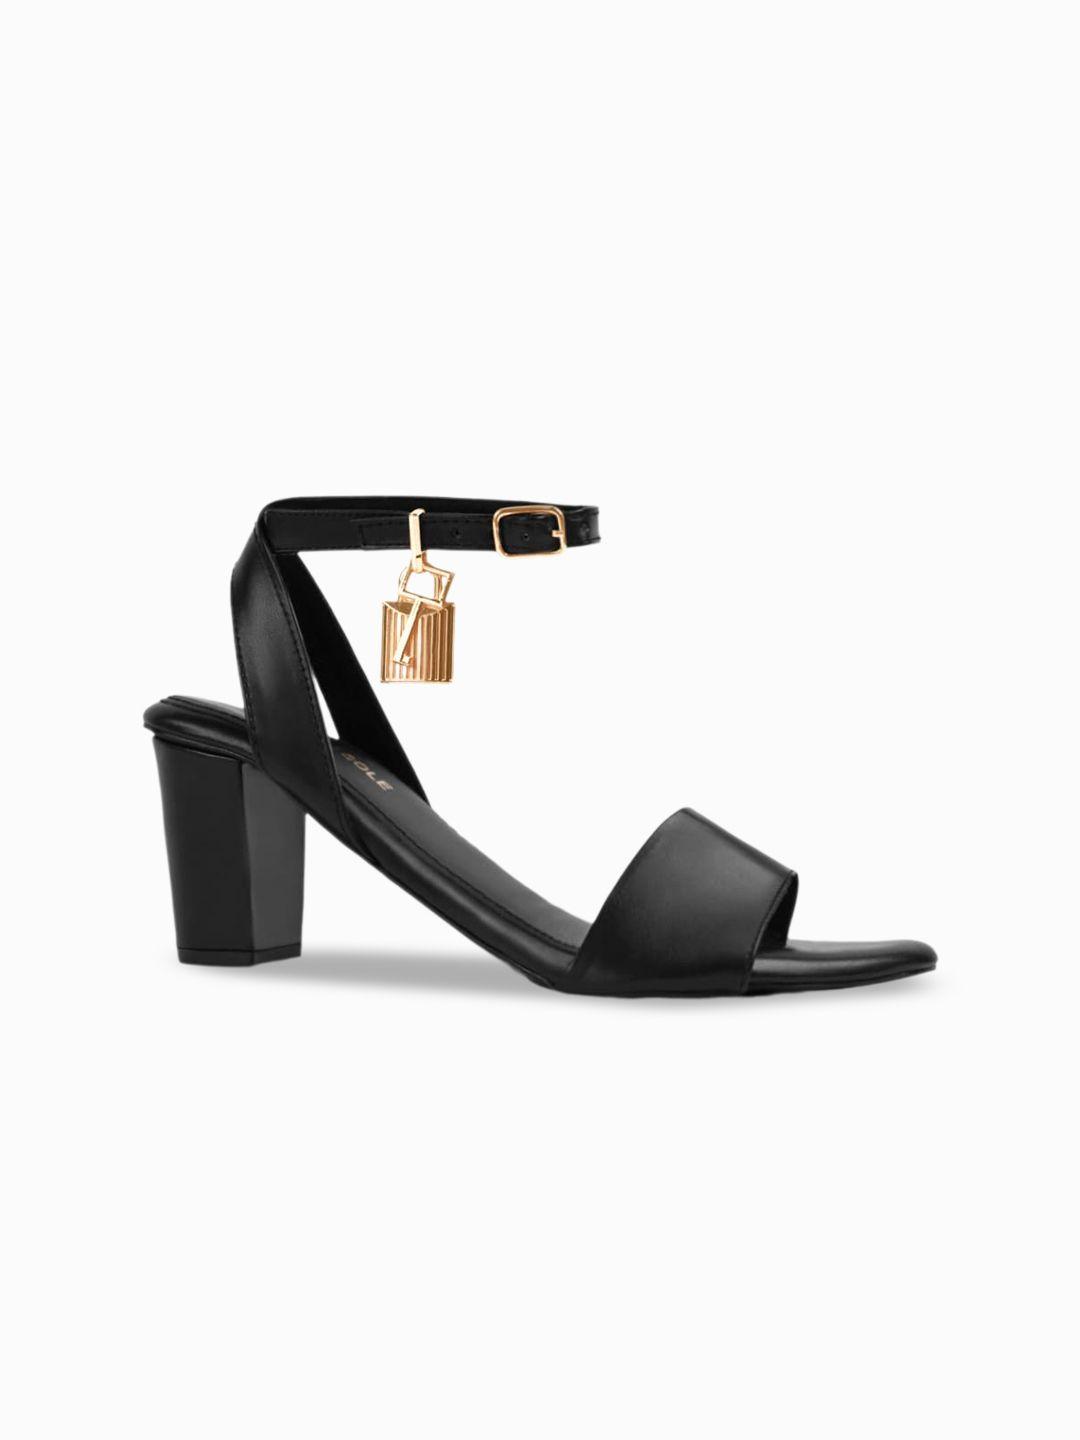 signature sole open toe block heels with ankle loop buckles detail